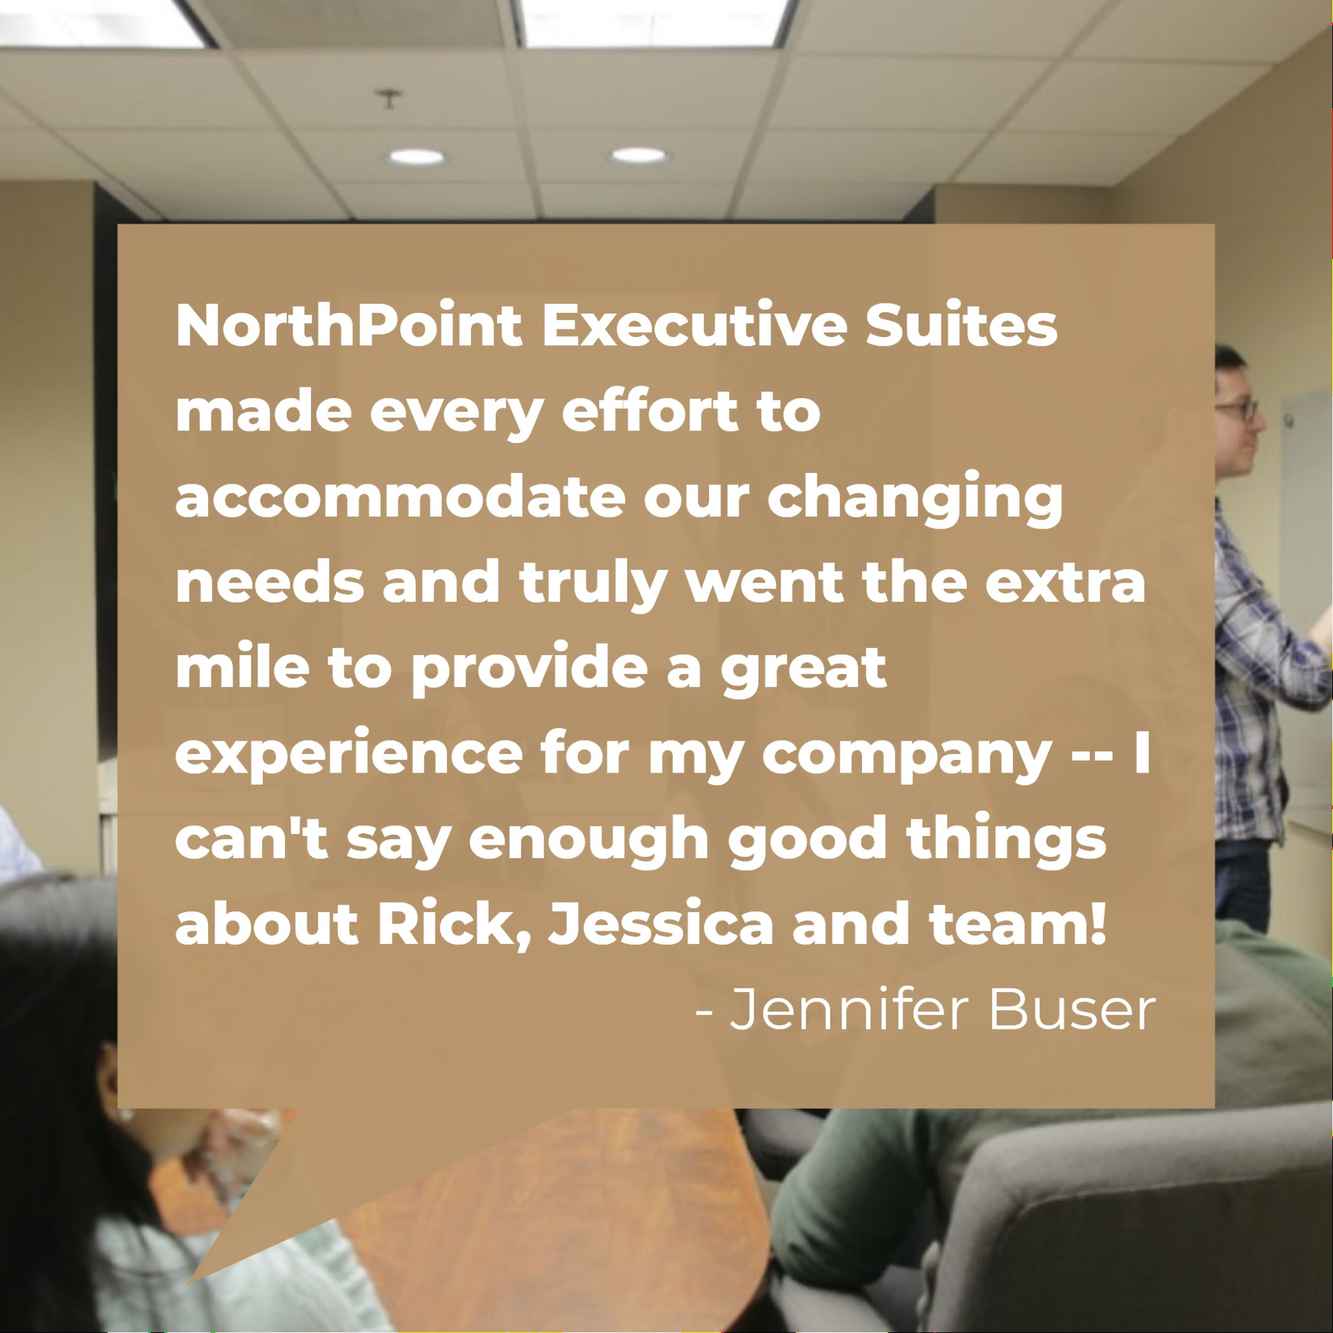 Let our tenants tell you why NorthPoint Executive Suites is the ideal office rental solution.